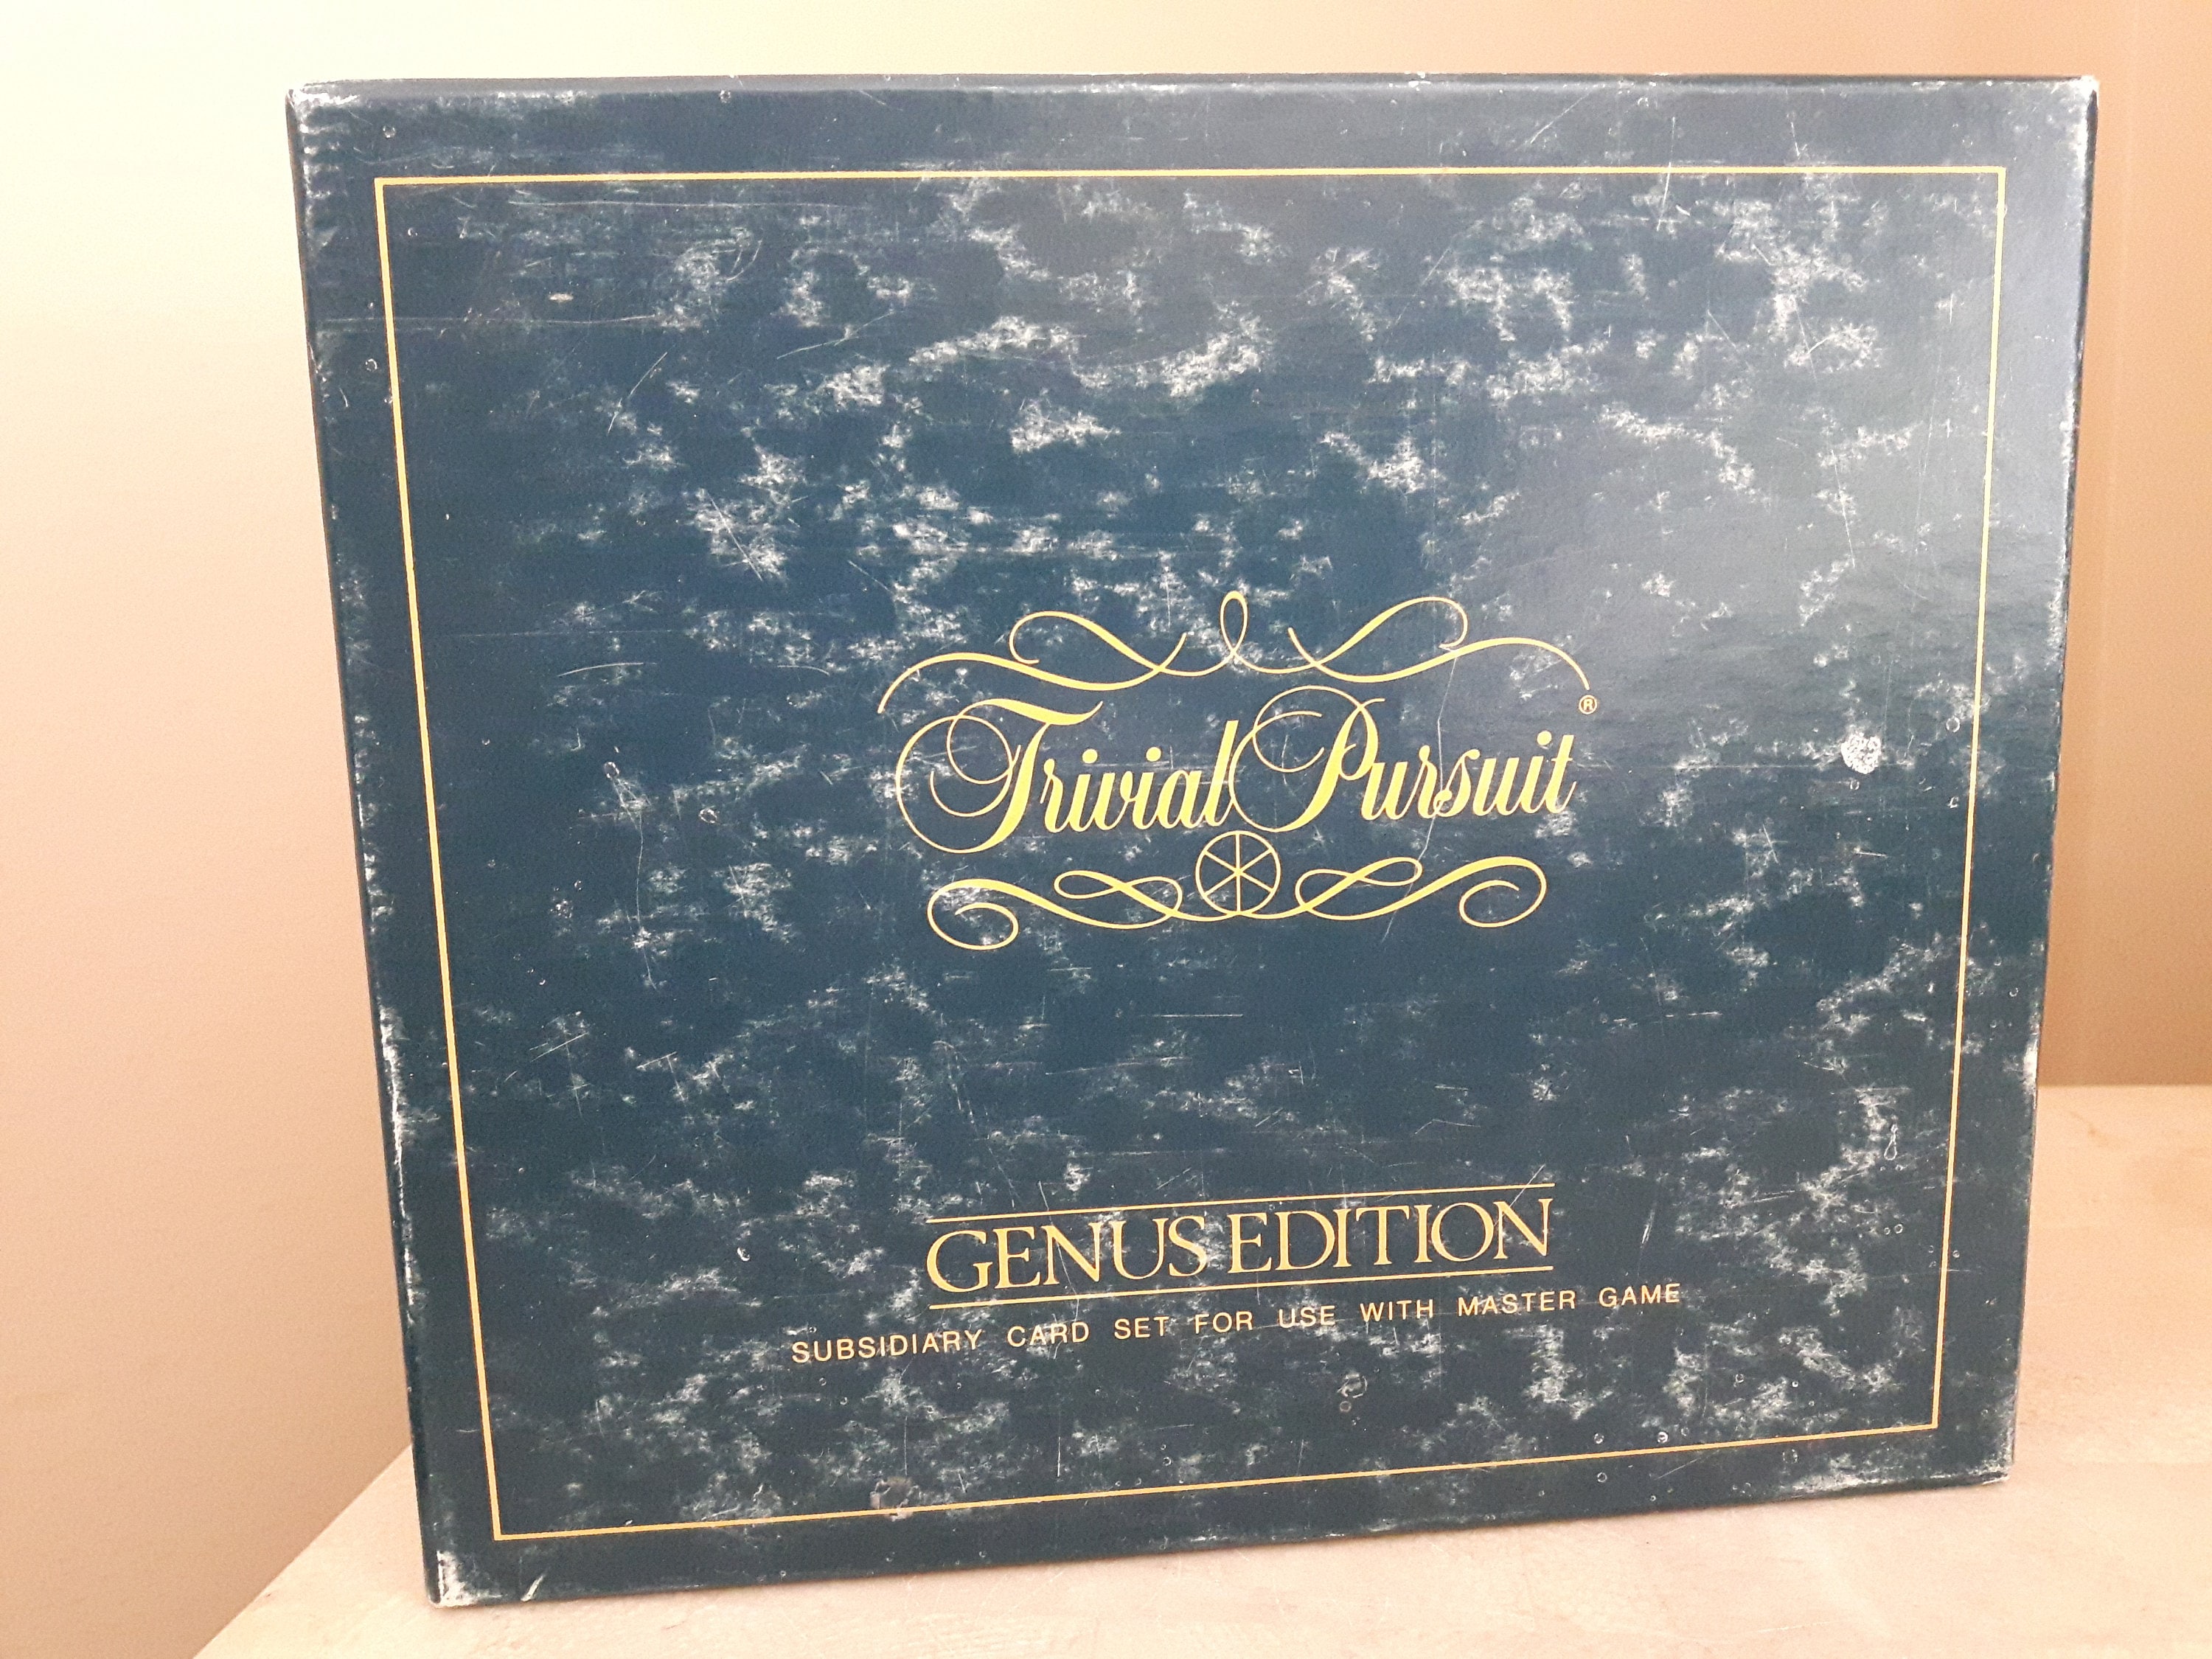 100 Trivial Pursuit Cards - You pick the edition! Genus and more